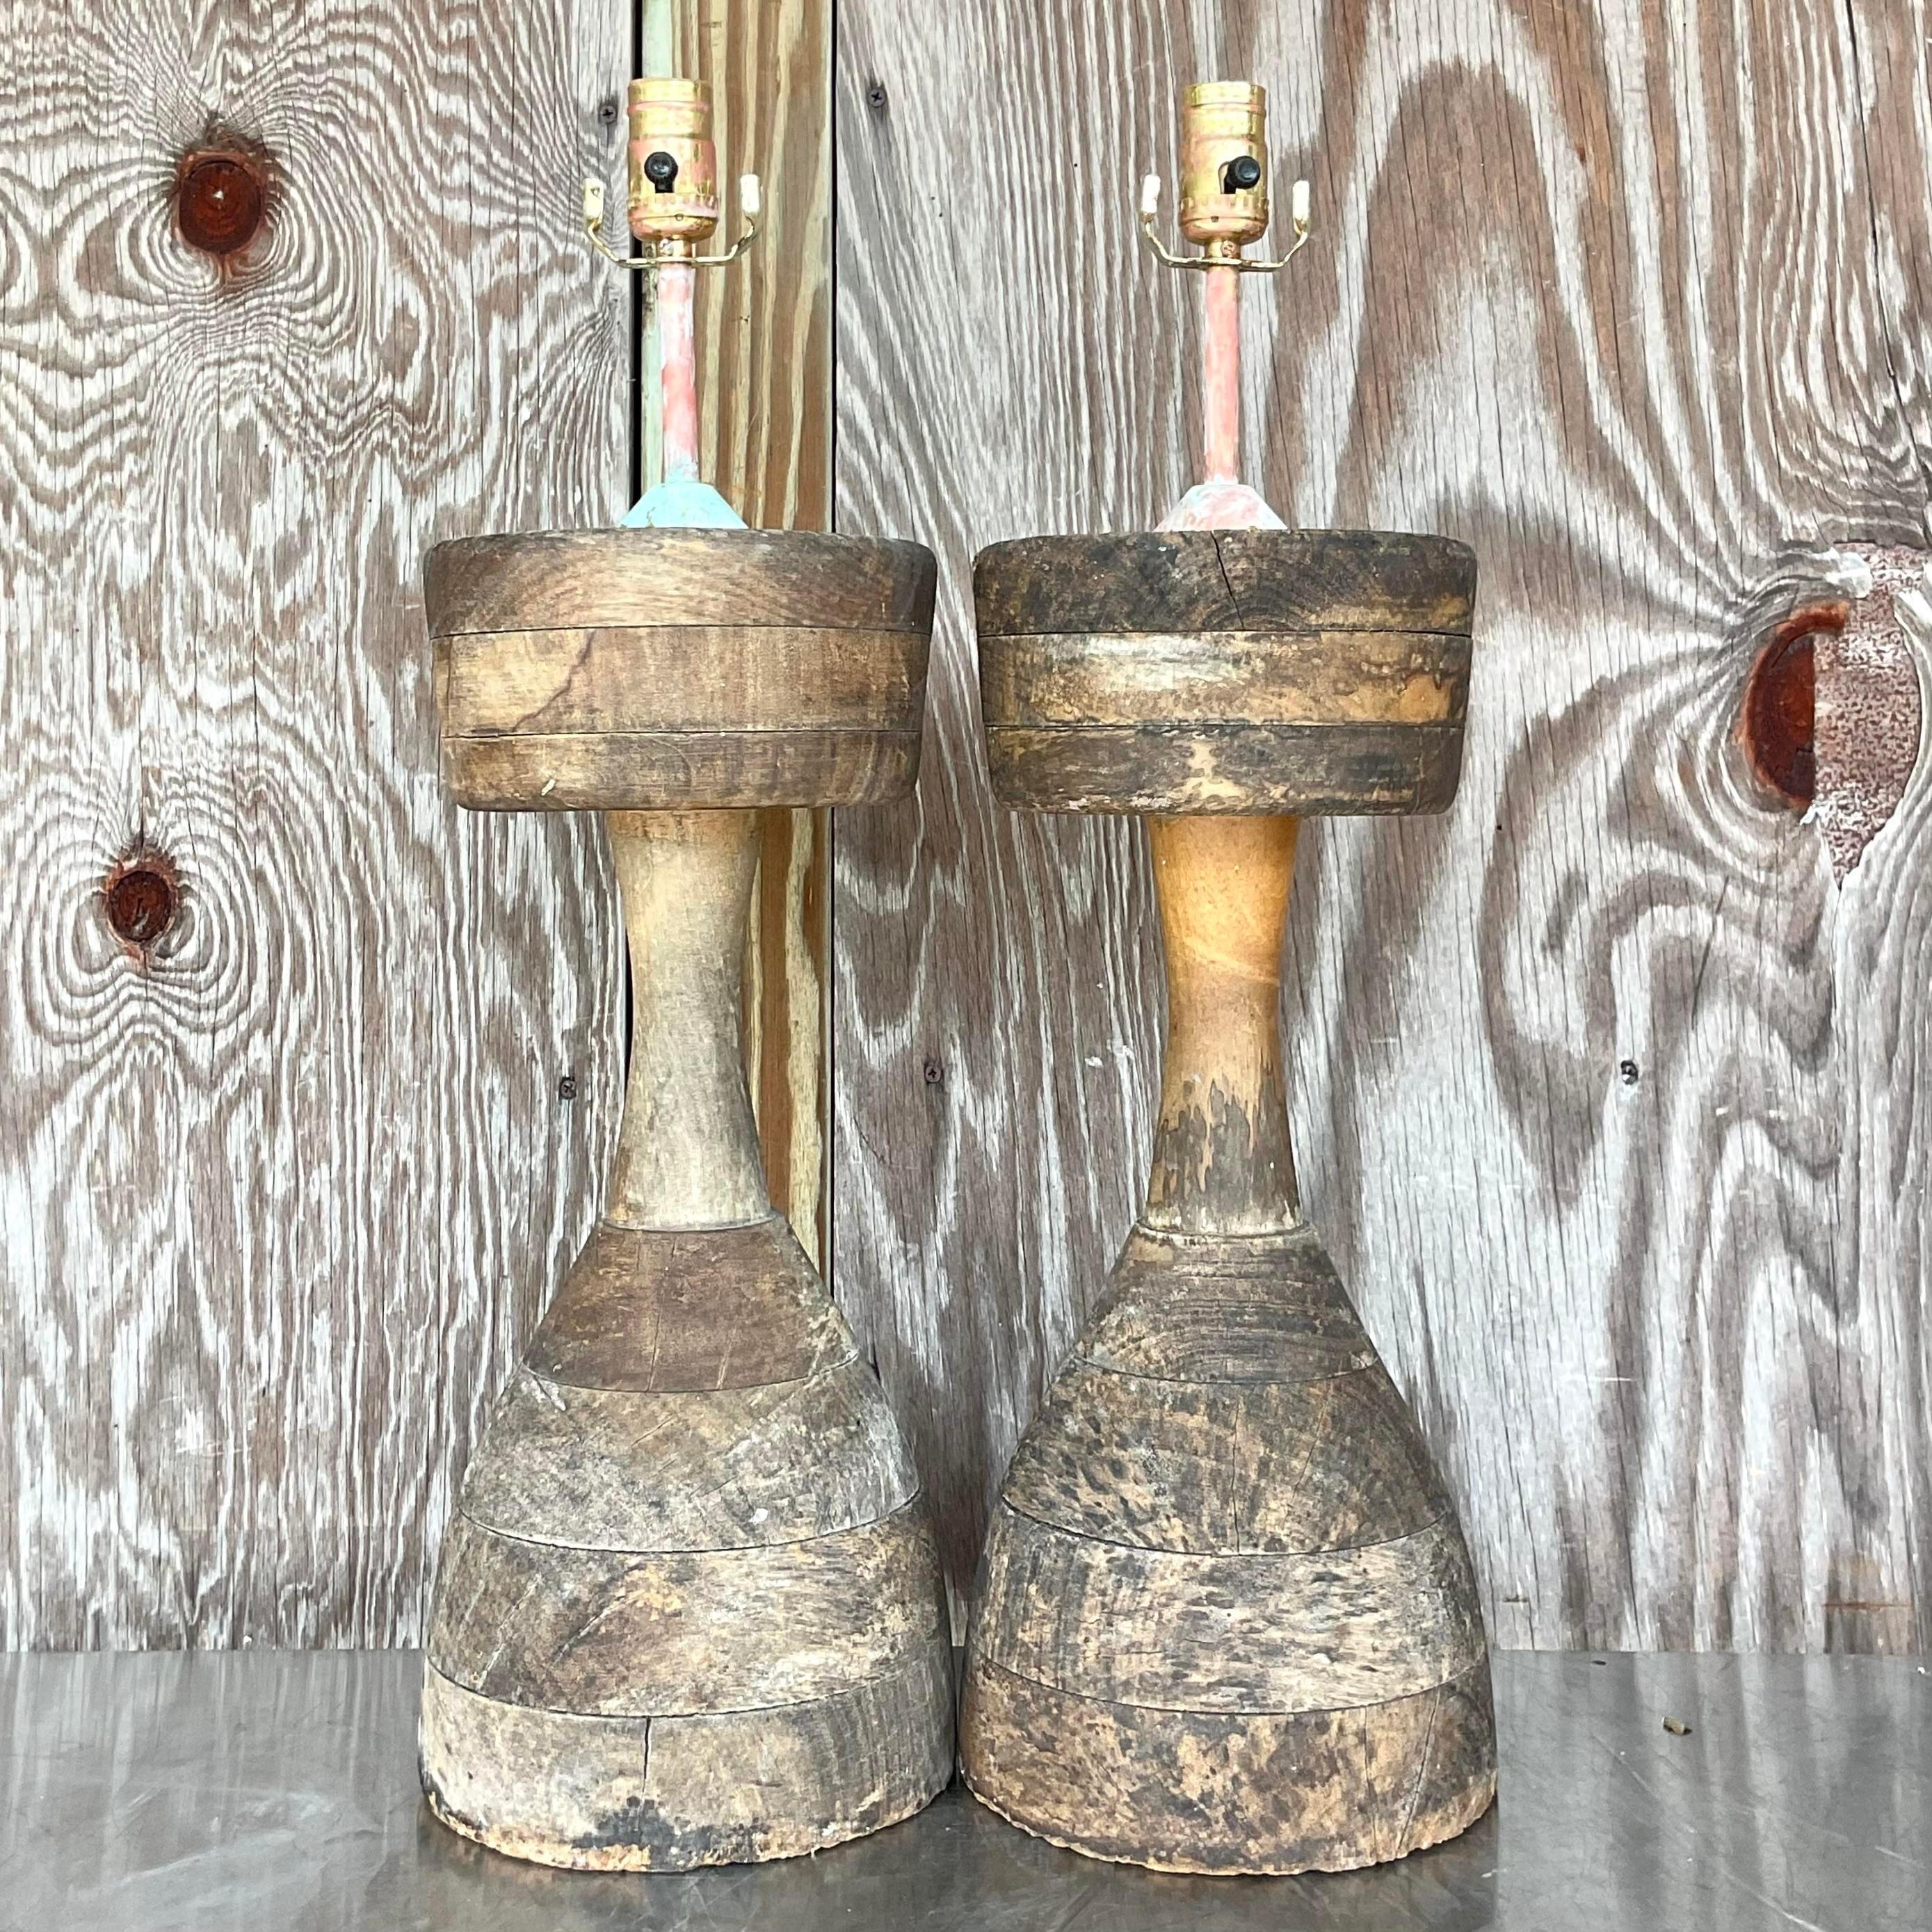 A striking pair of vintage Boho wood lamps. Chic turned wood with a weathered finish. Hand painted hardware really adds to the overall artisan look. Acquired from a Palm Beach estate. 